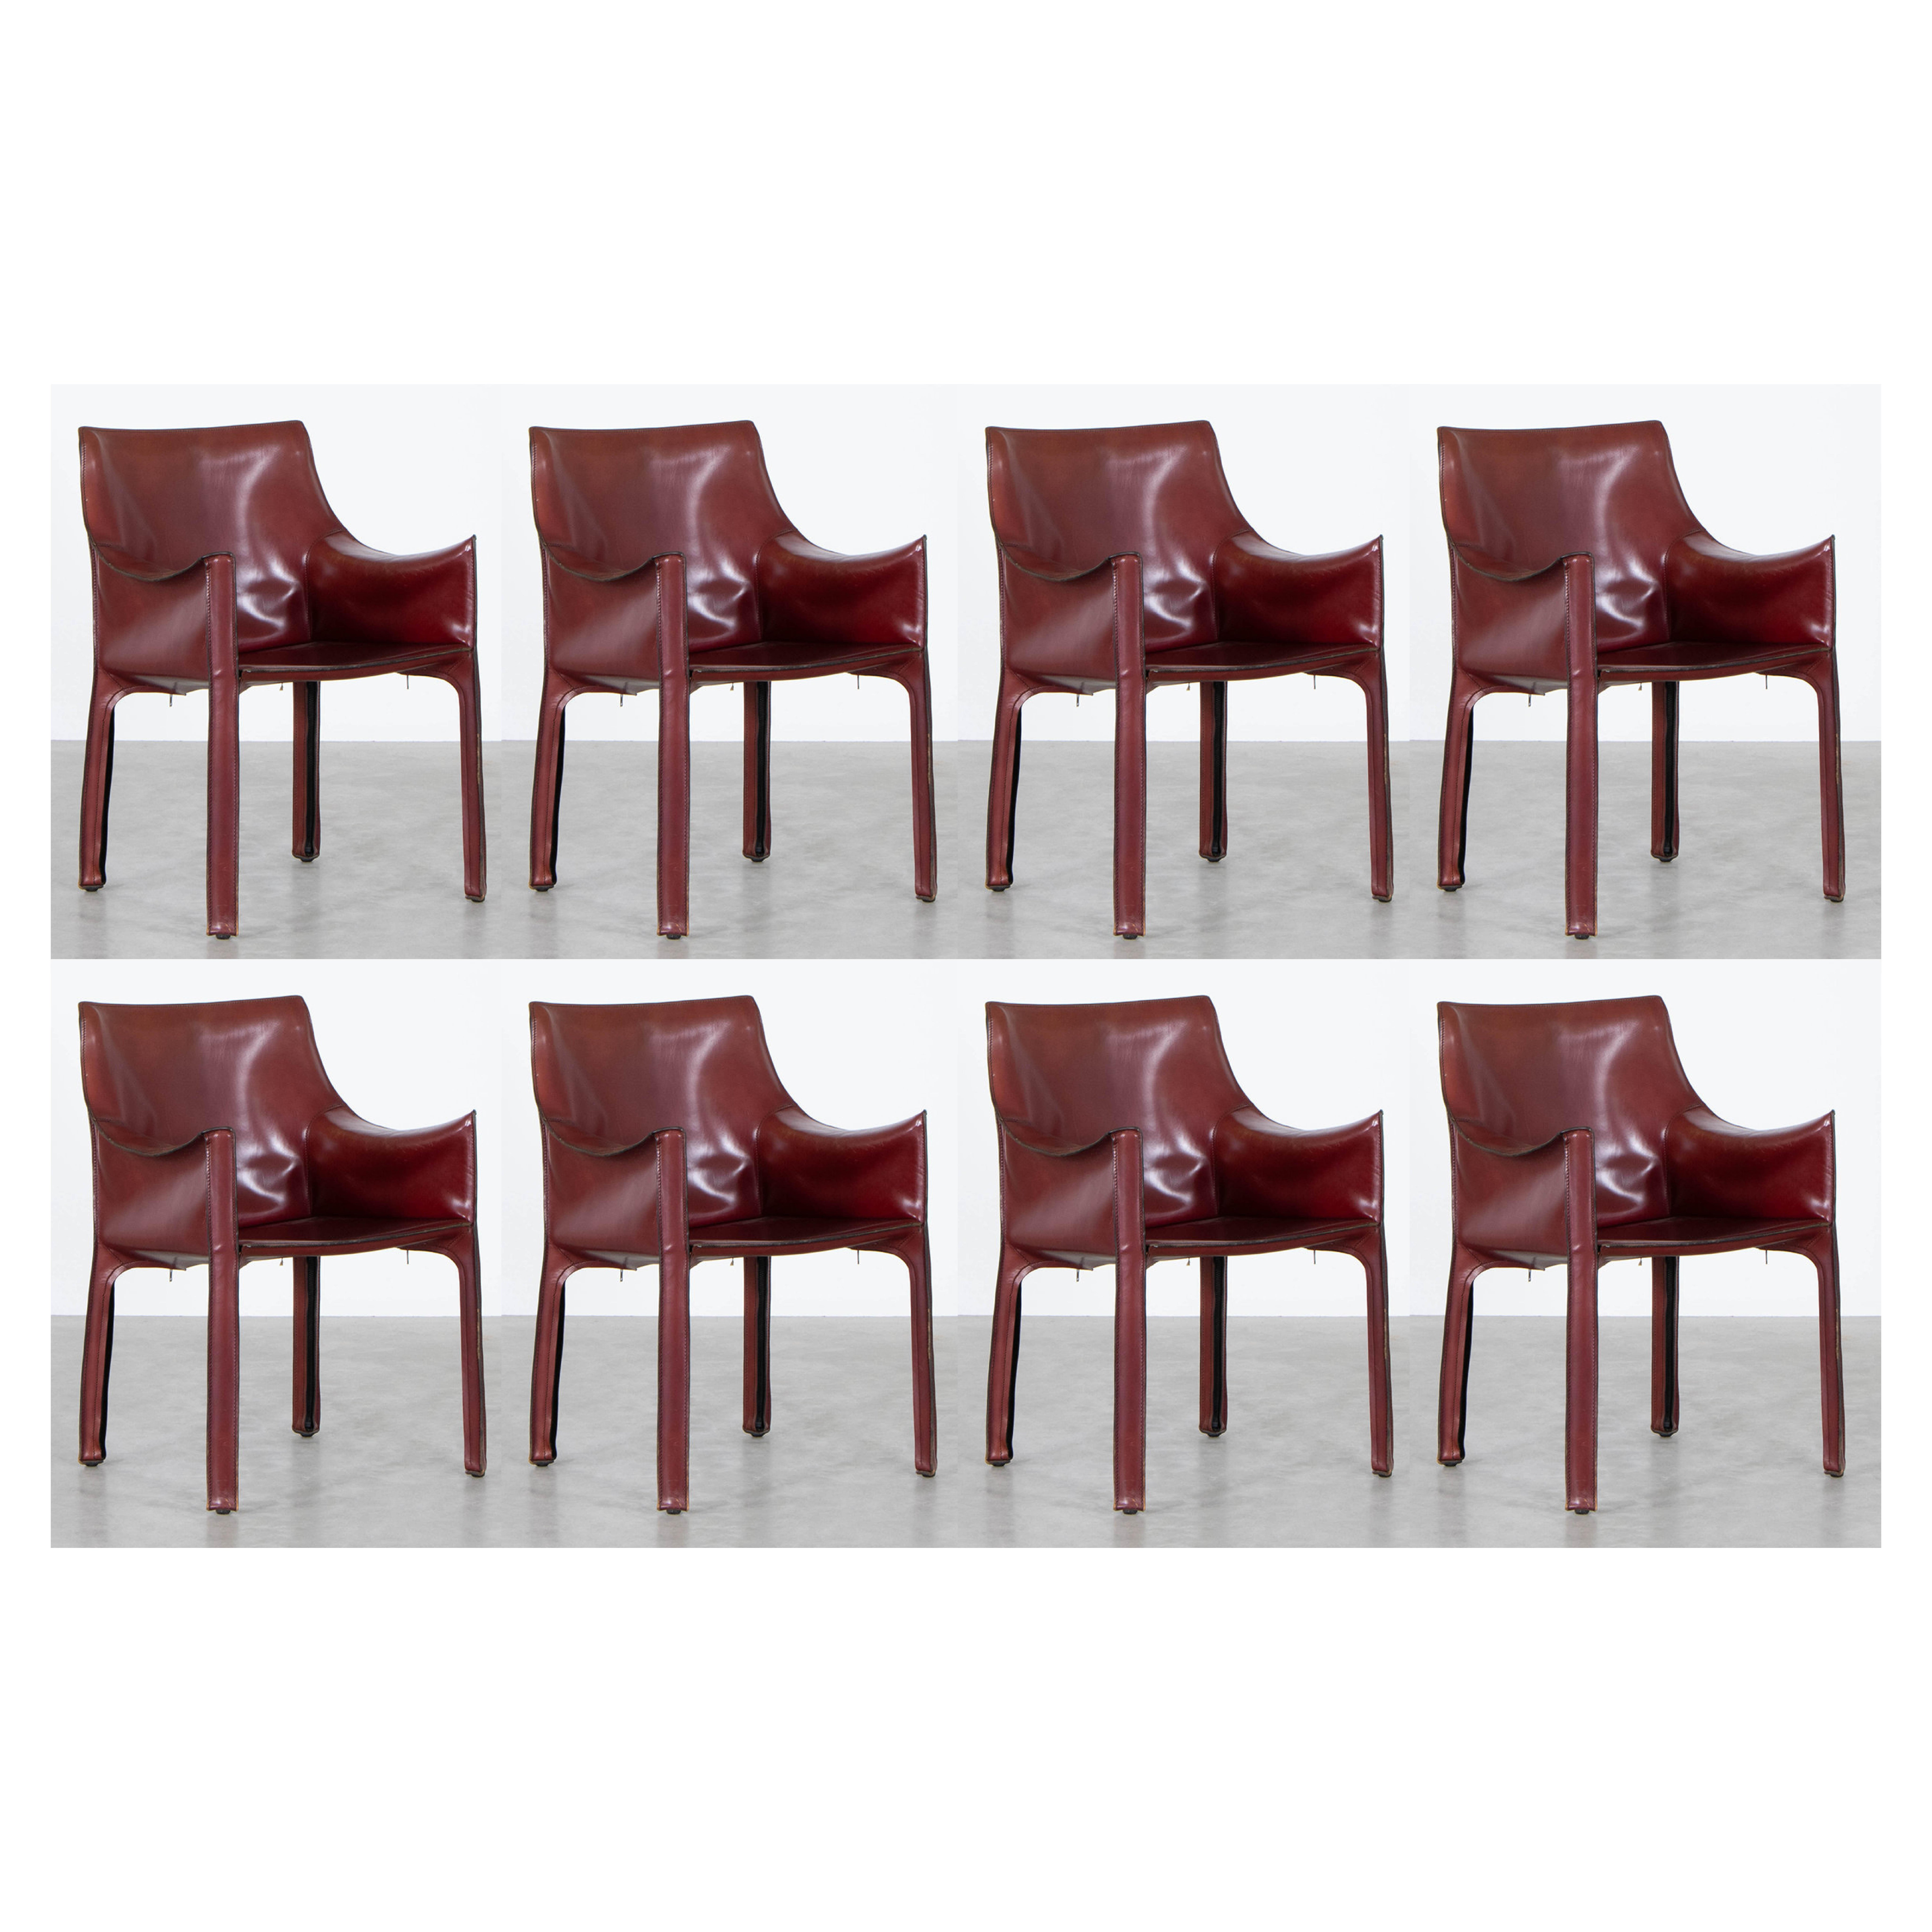 Mario Bellini "CAB 413" Chairs for Cassina in Bordeaux, 1977, Set of 8 For Sale